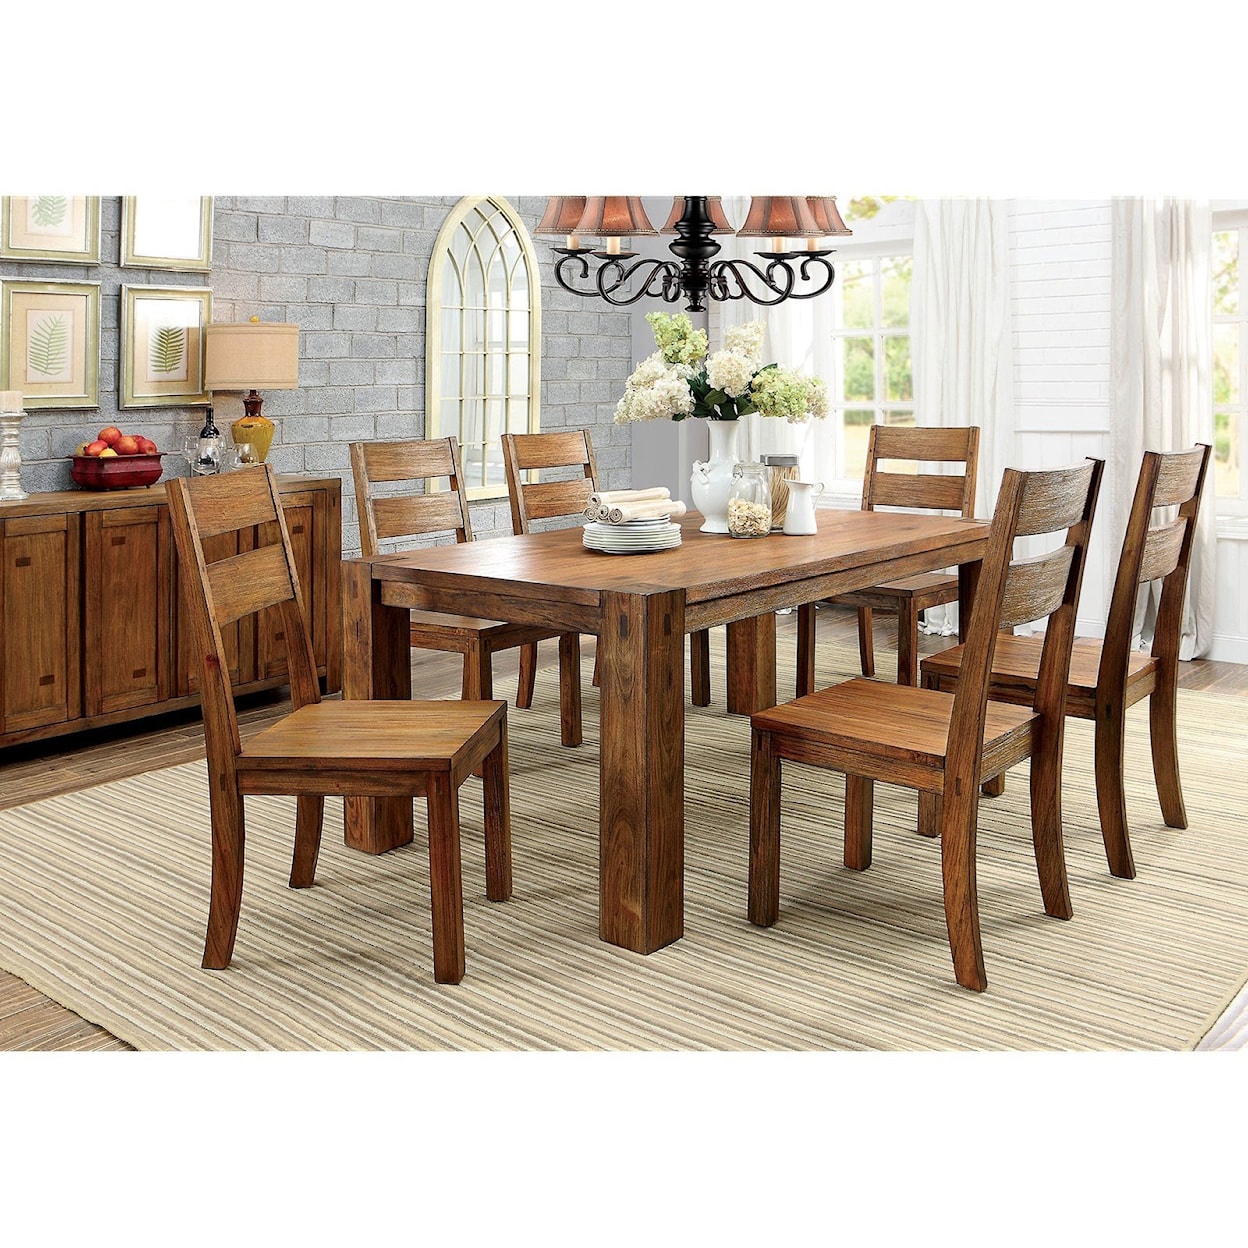 Furniture of America Frontier Dining Table and Chair Set